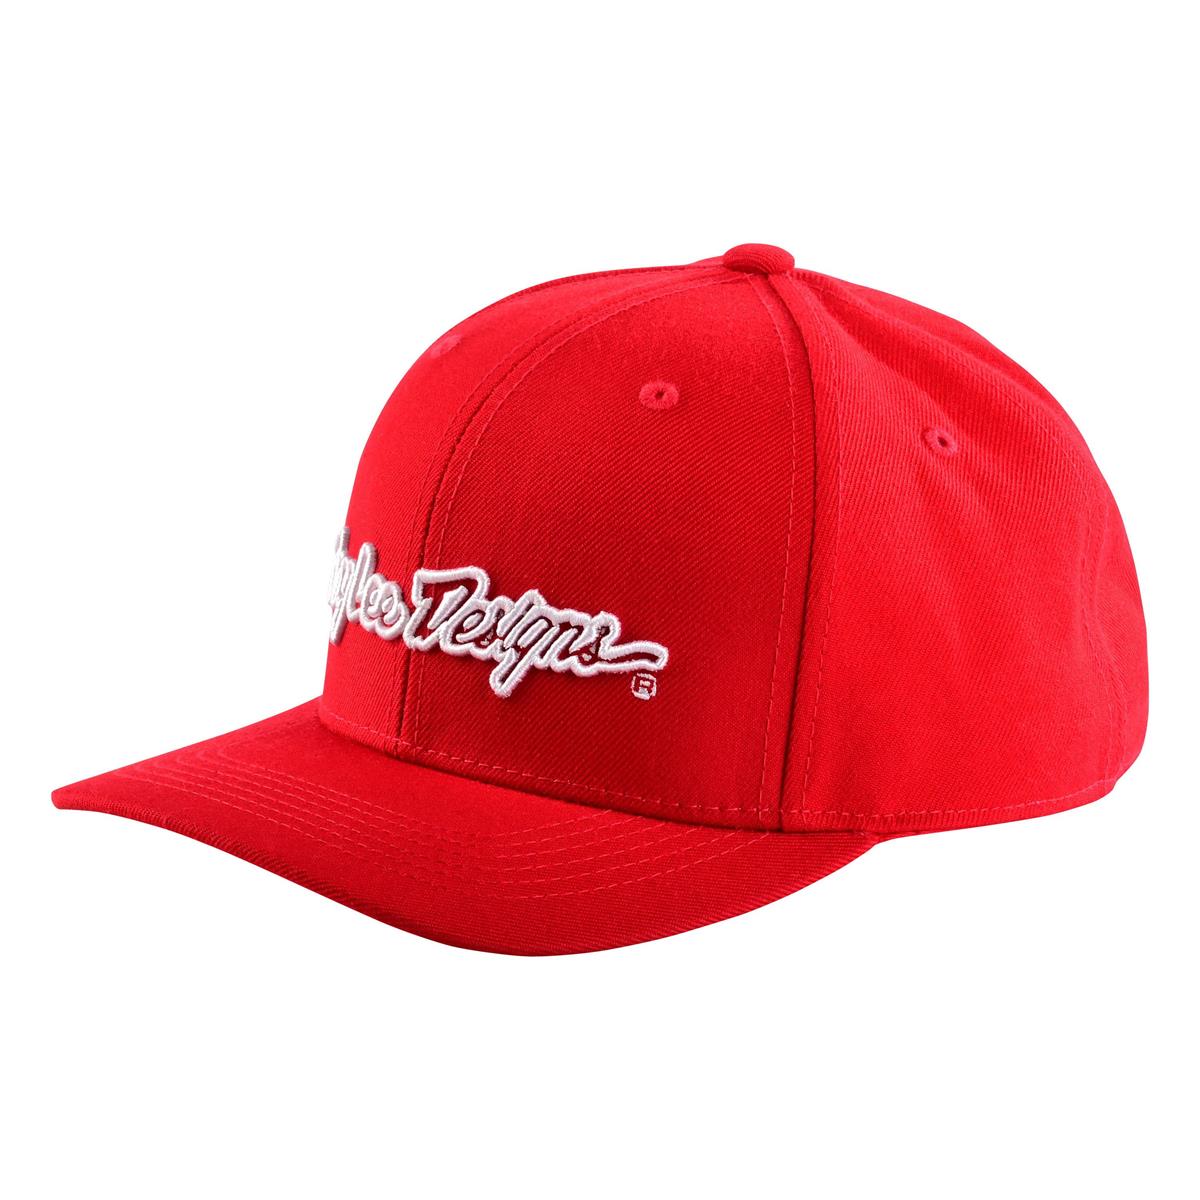 Troy Lee Designs 9Fifty Cappellino Snap Back Signature Rosso/Bianco